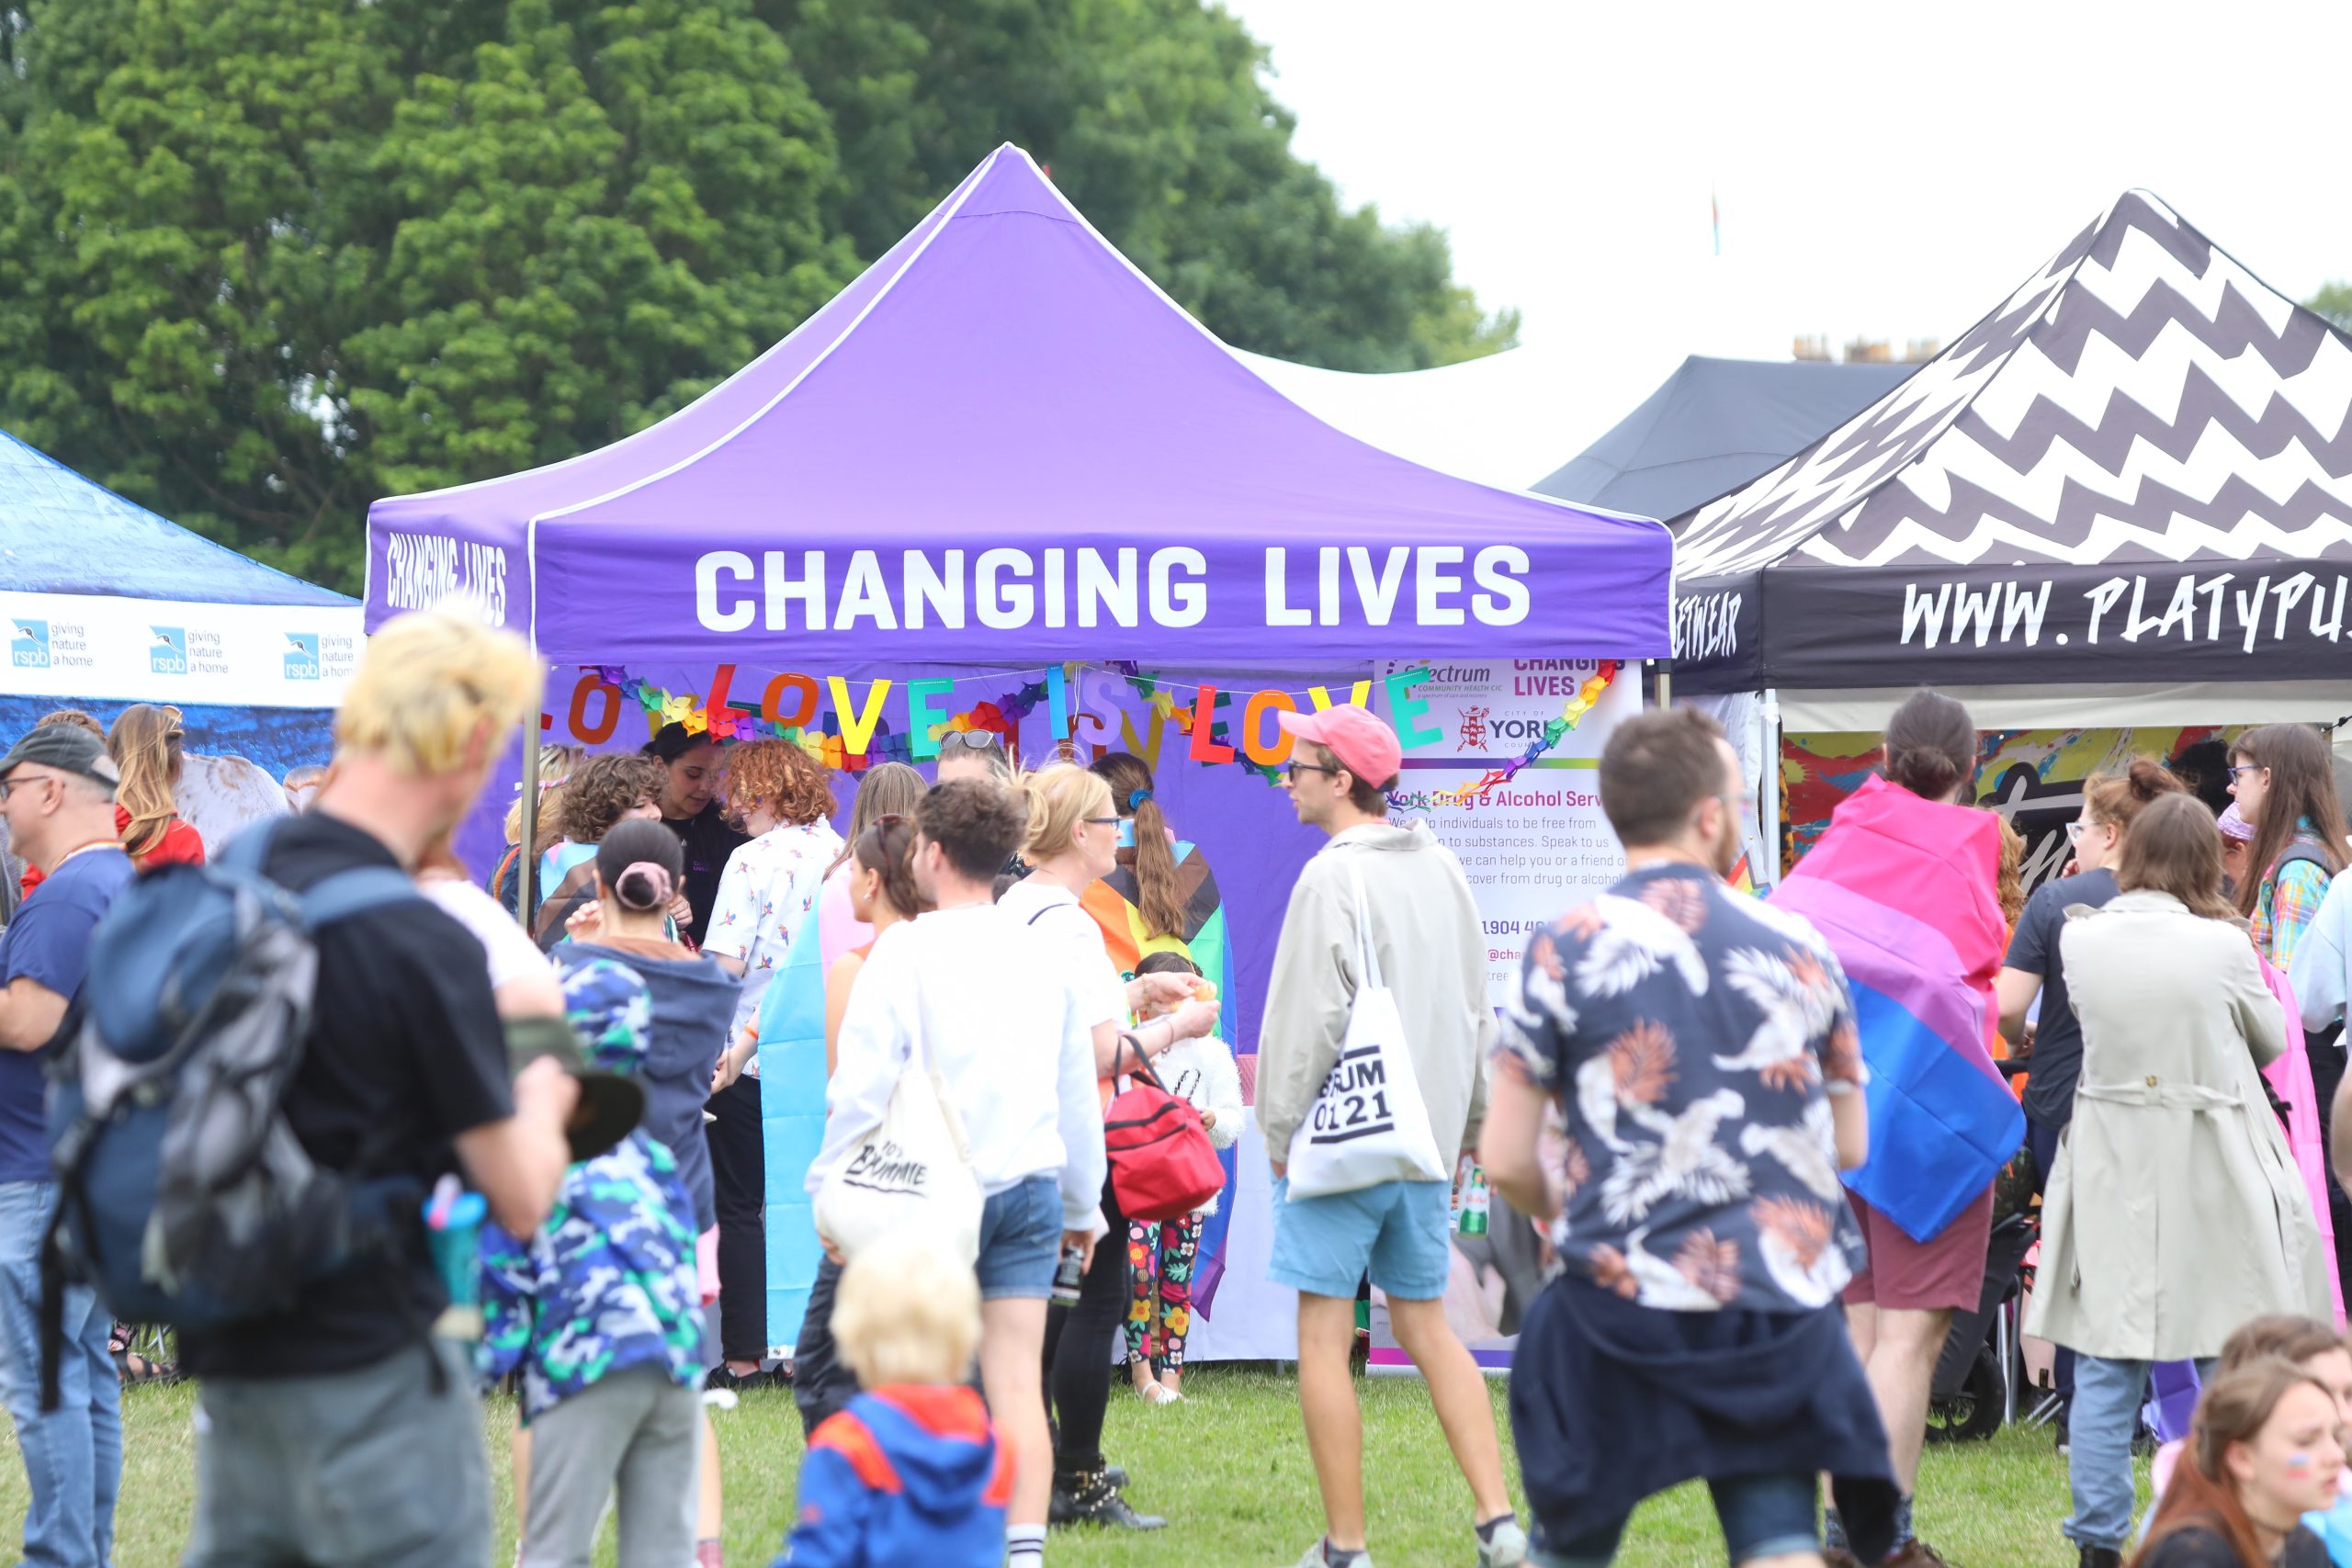 Charity and clothing stalls